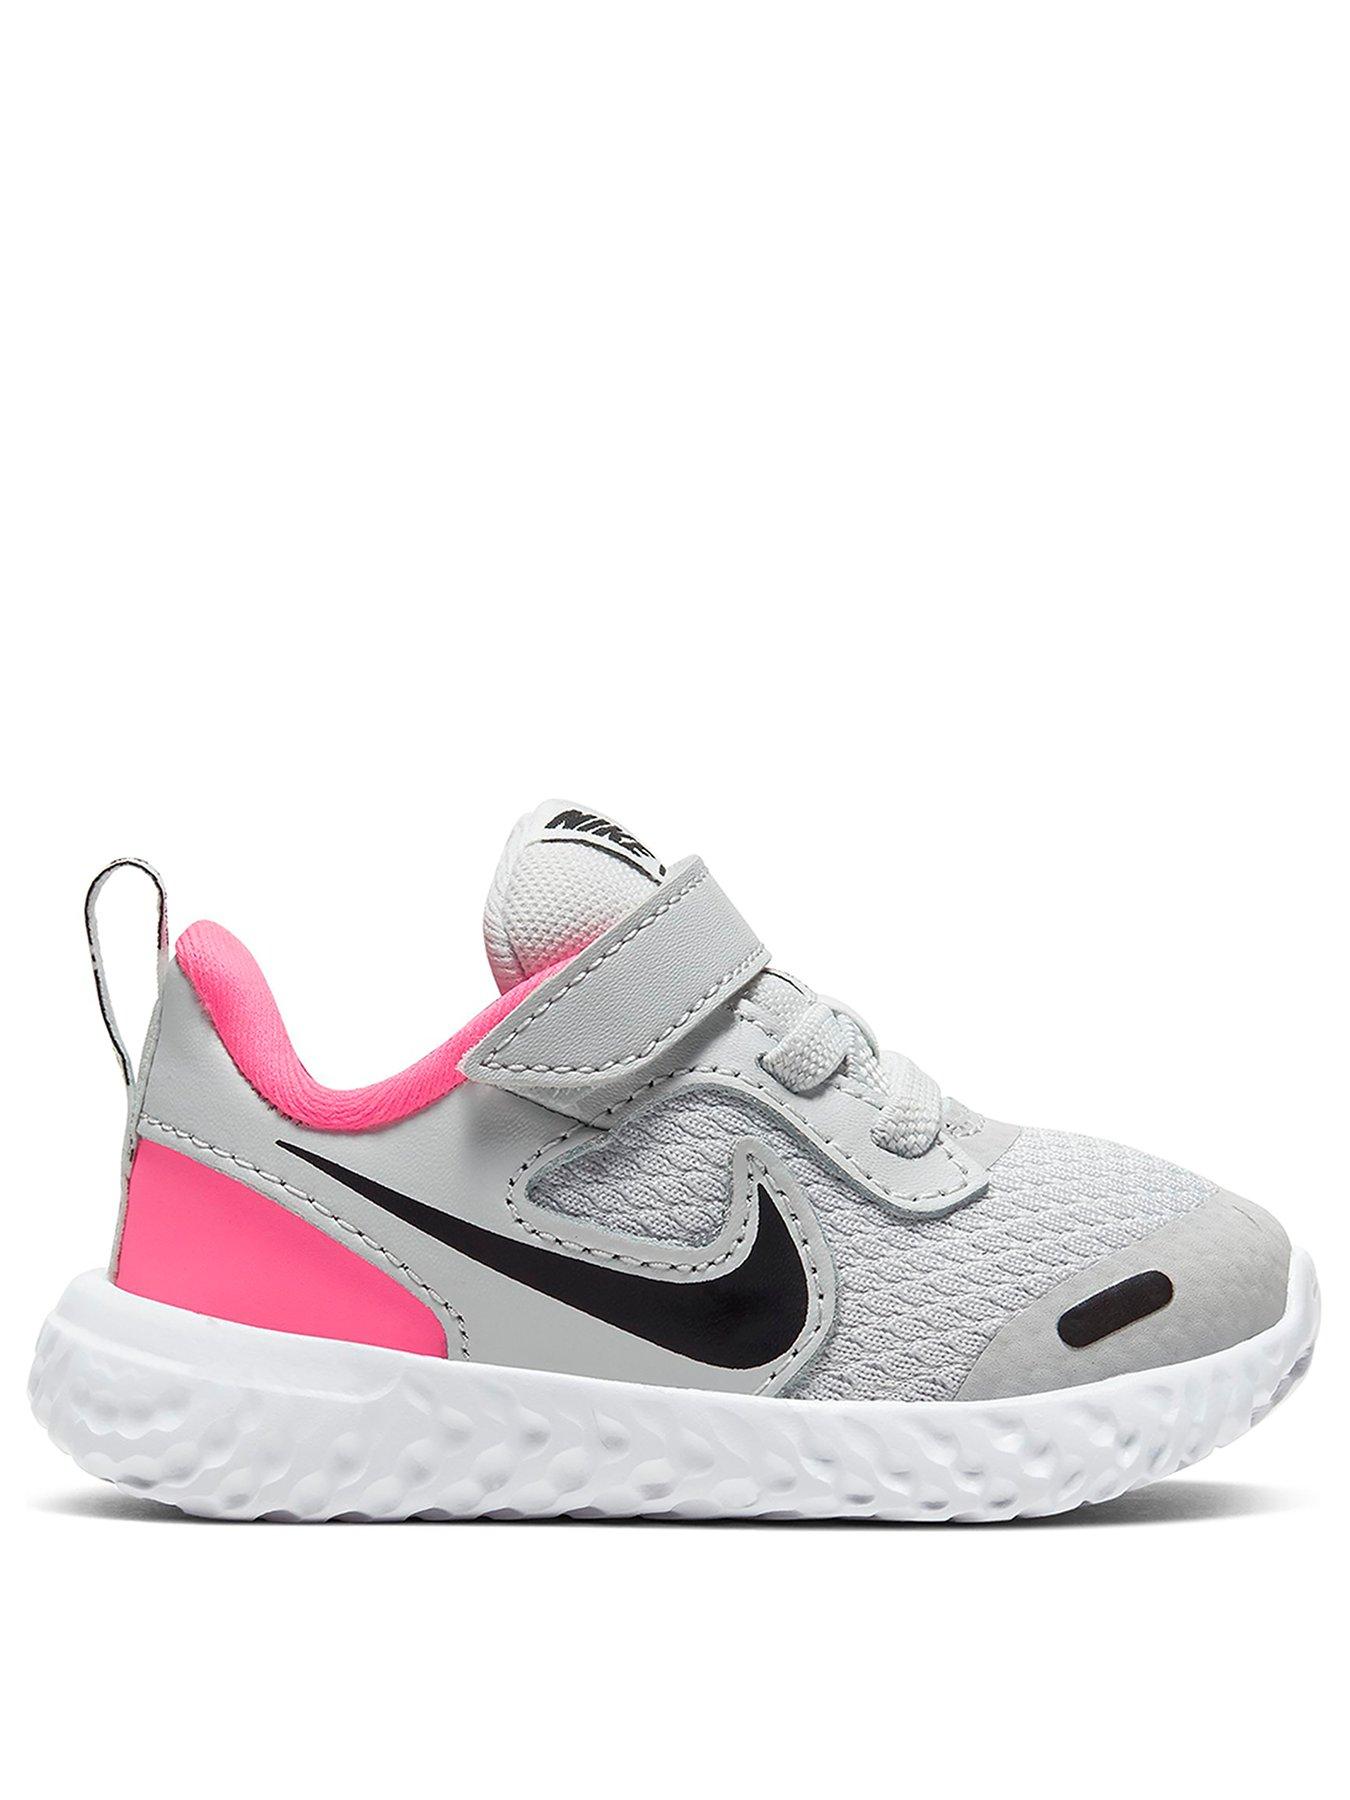 infant 7.5 trainers